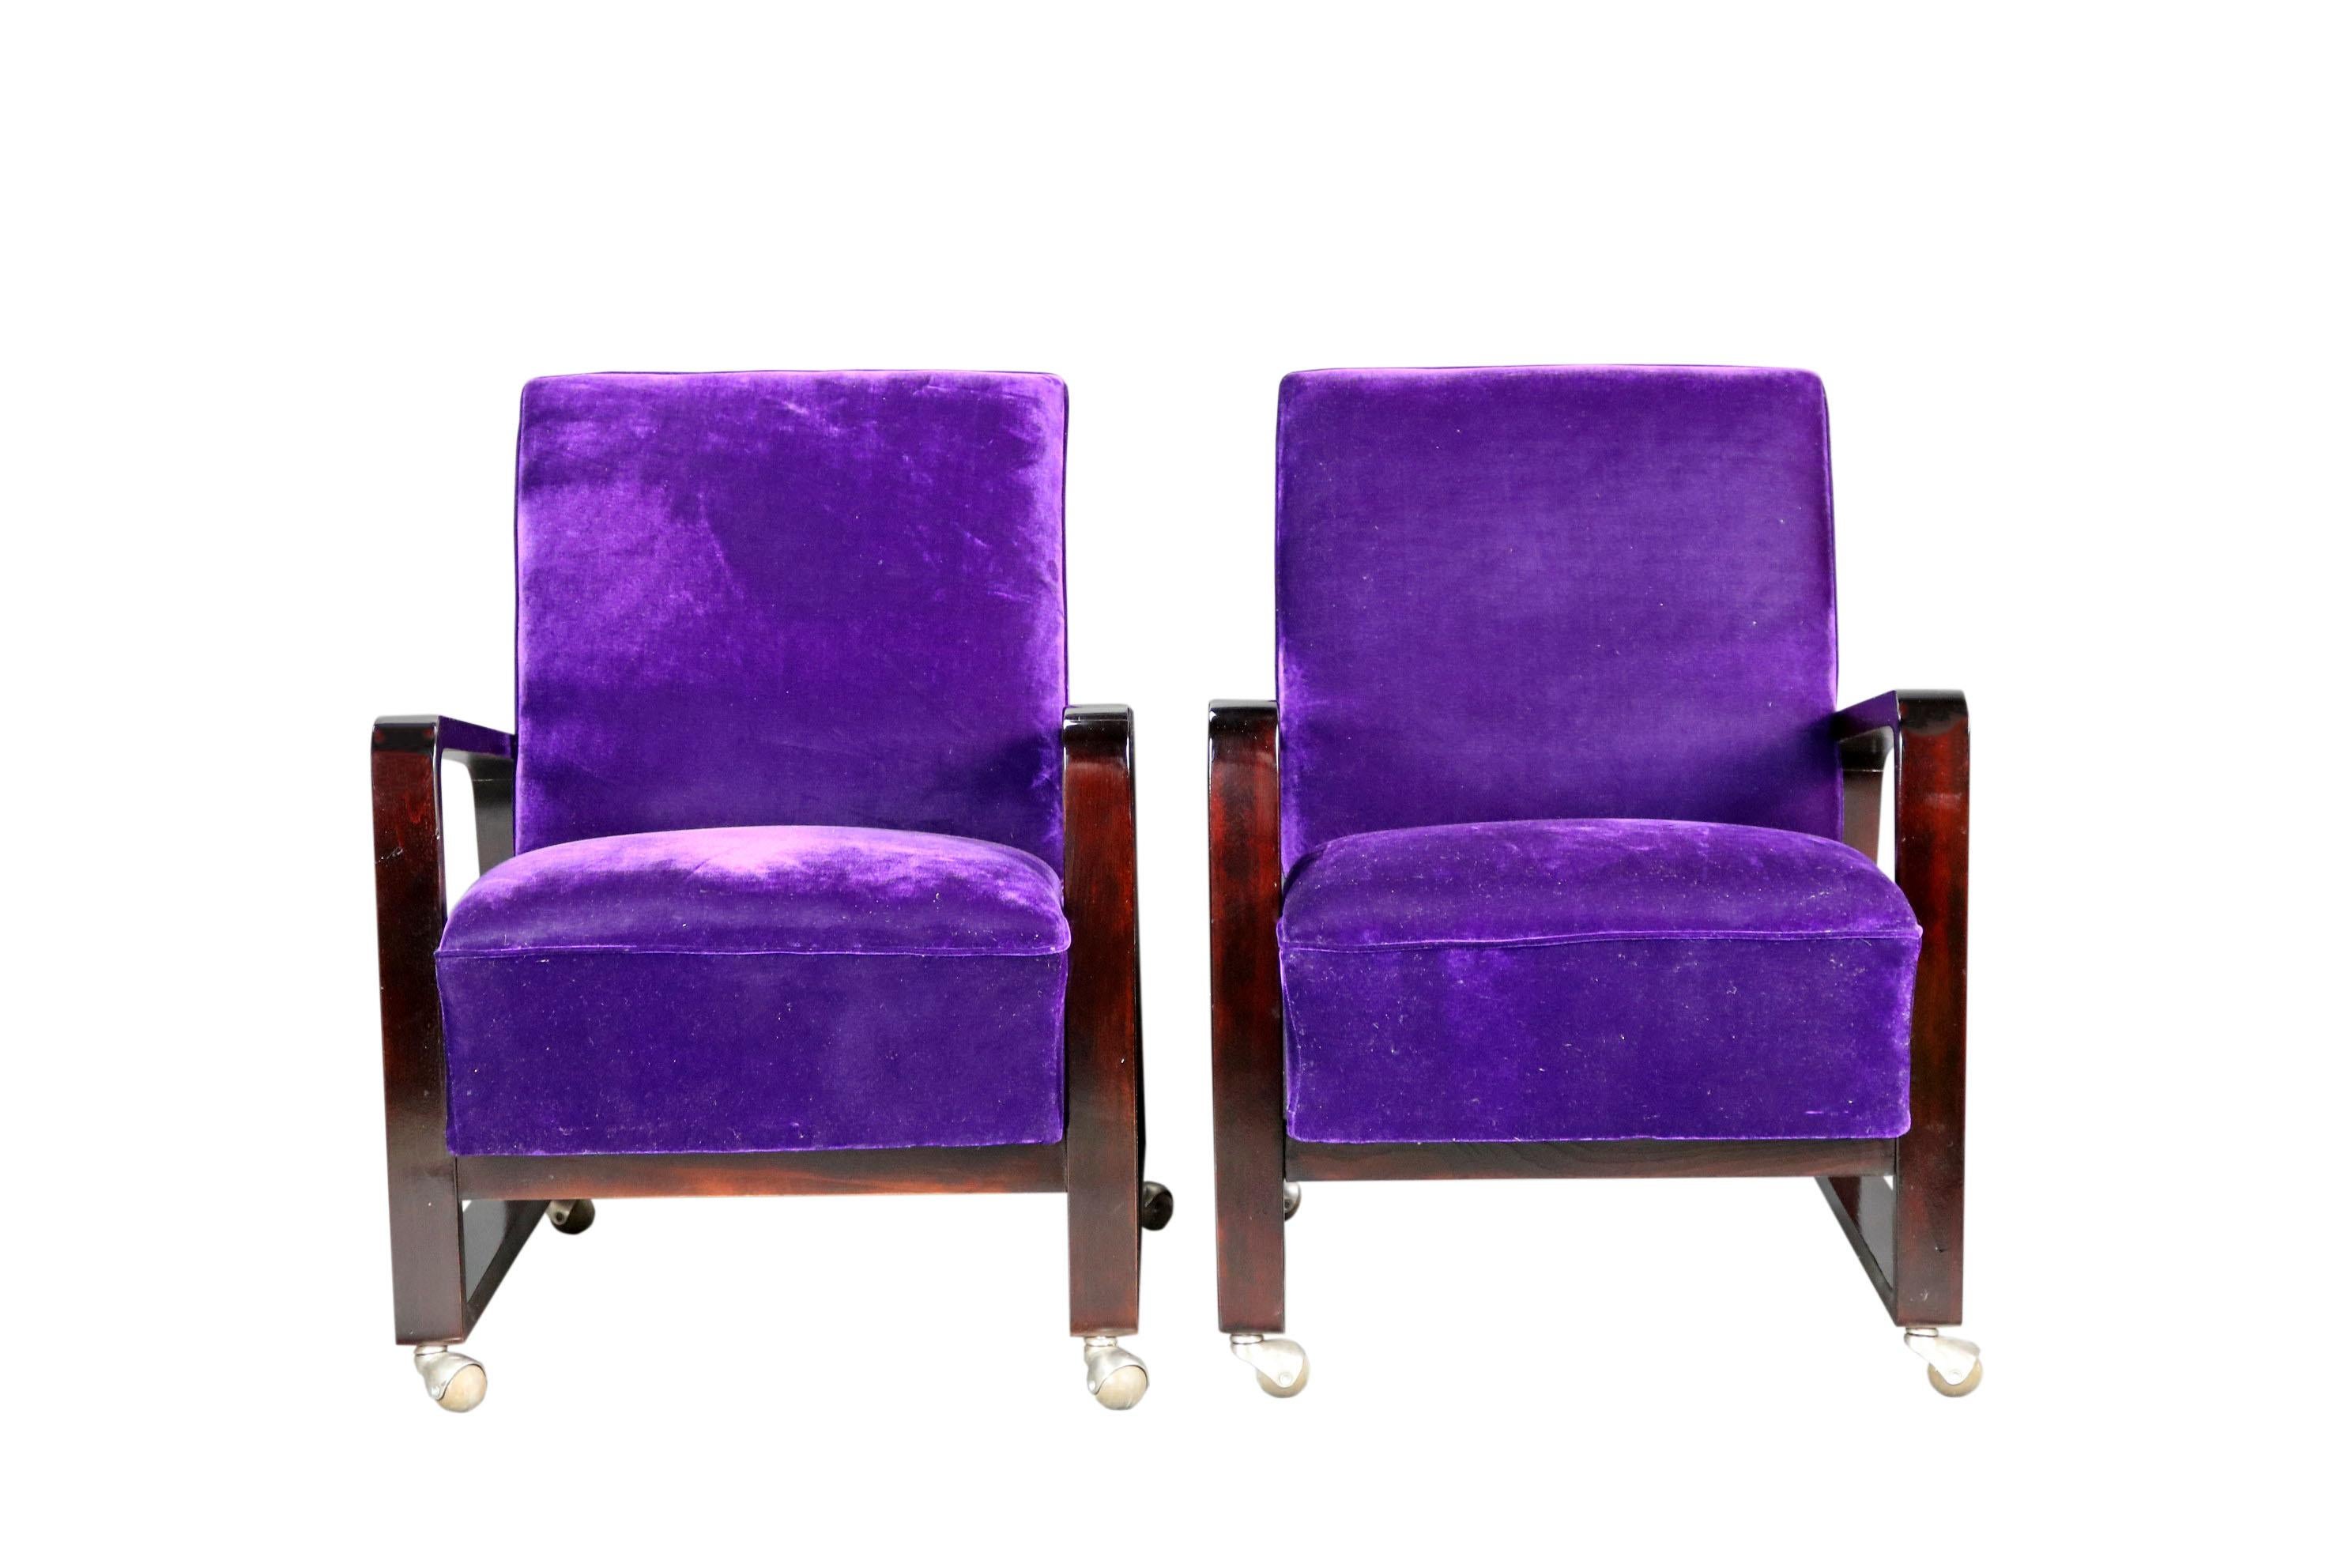 An elegant Art Deco set of armchairs. The rollers are original, the wood is restored, and the chair was re-upholstered. It features and elegant deep purple upholstery, which will fit in any luxury interior.